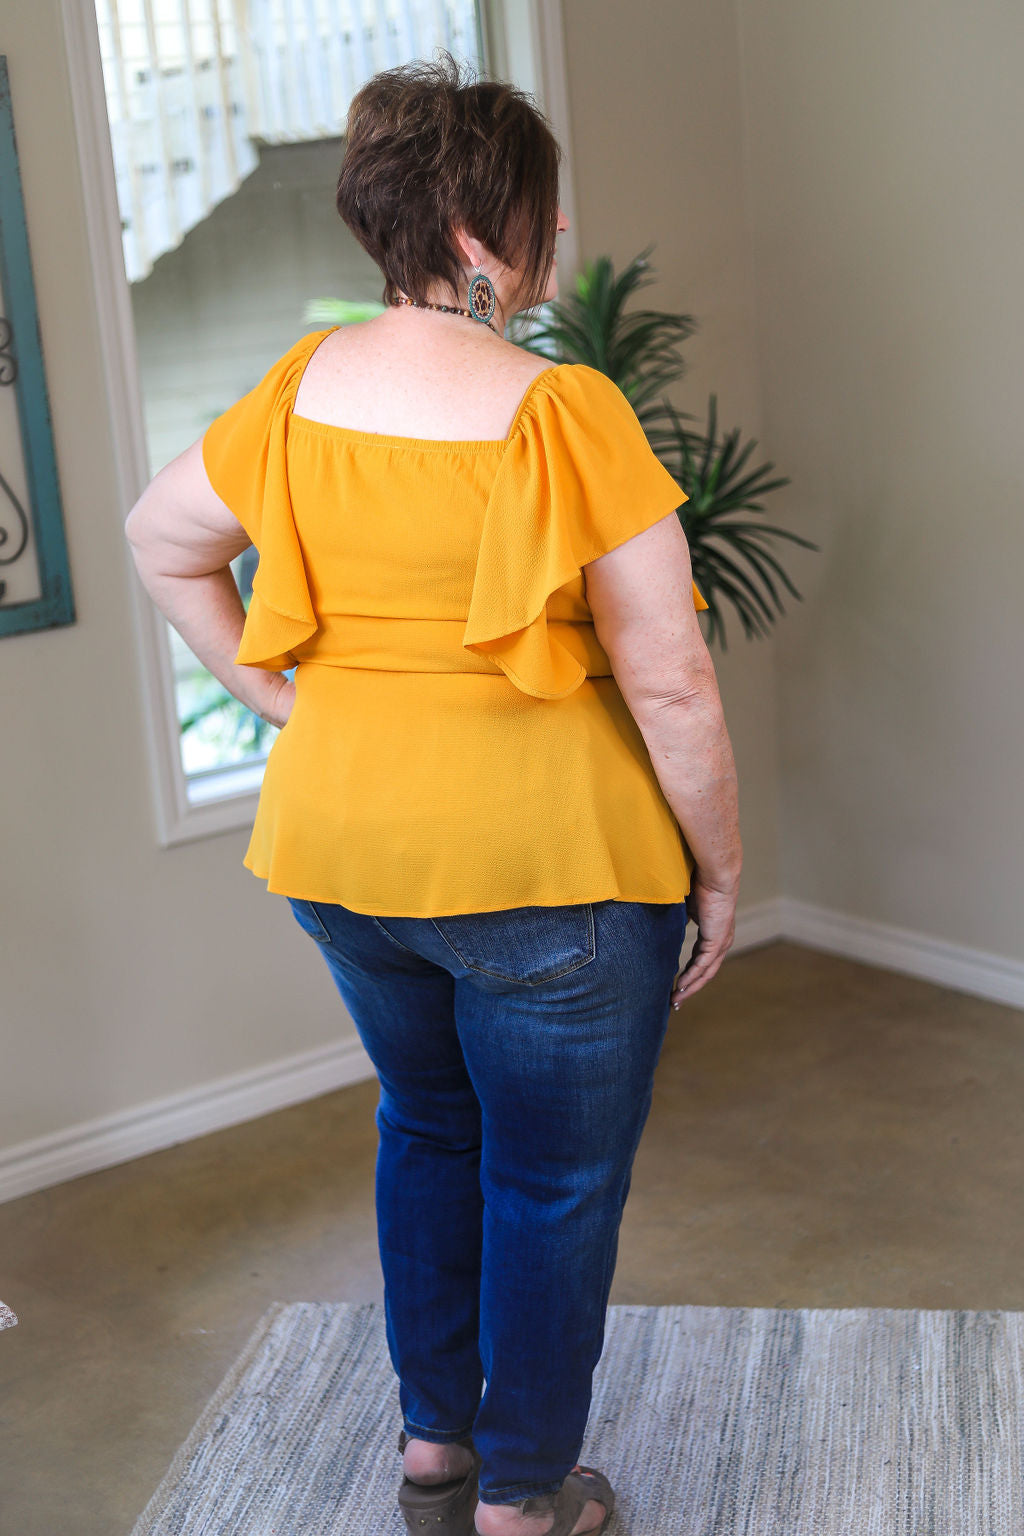 Last Chance Size 3XL | Plus Size | Resounding Success Peplum Top with Button Detail in Mustard Yellow - Giddy Up Glamour Boutique